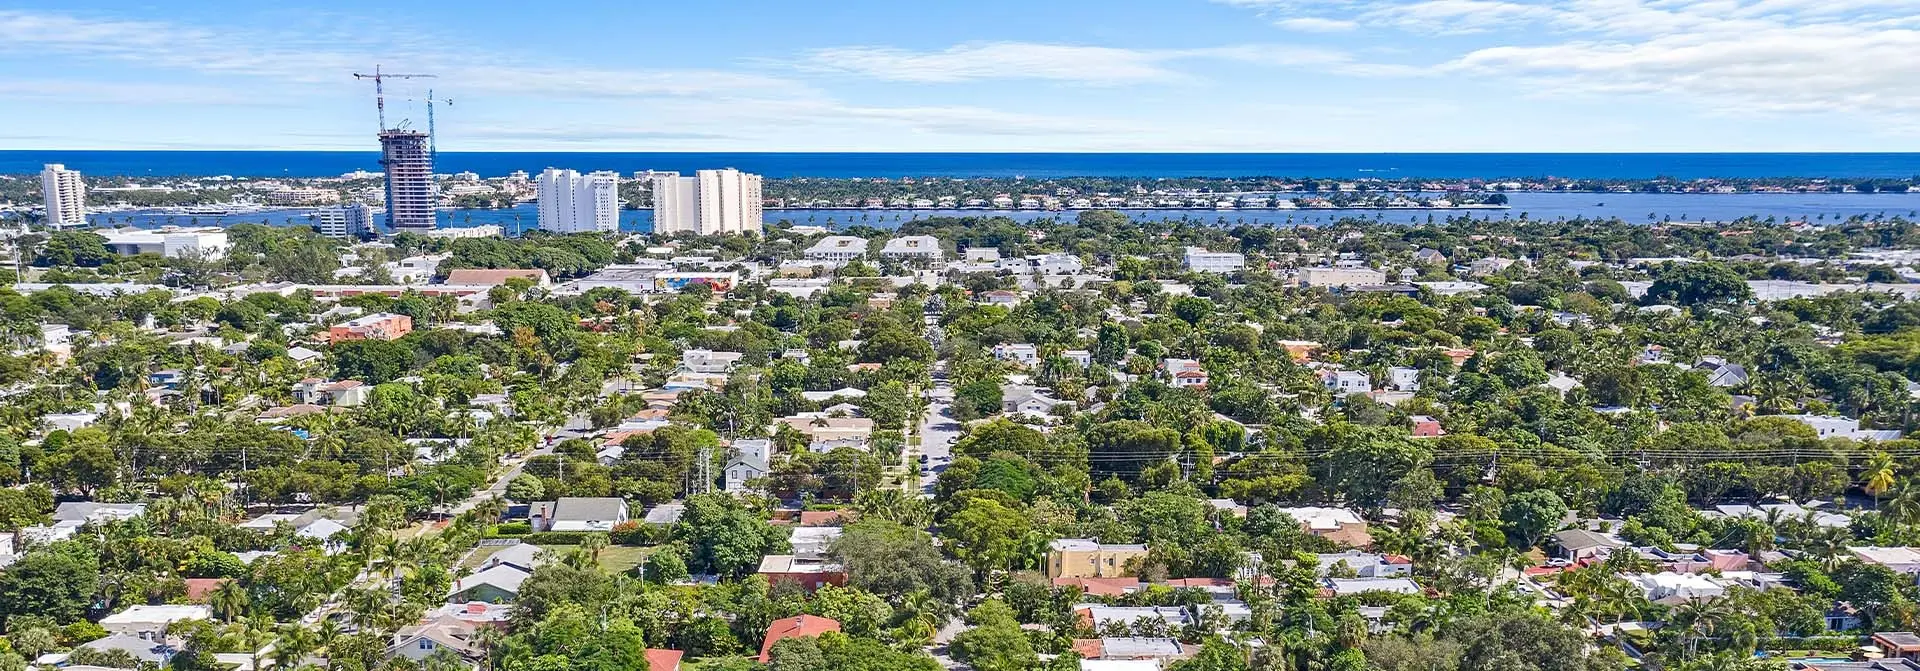 Flamingo Park Homes for Sale | Homes for Sale in Flamingo Park West Palm Beach 